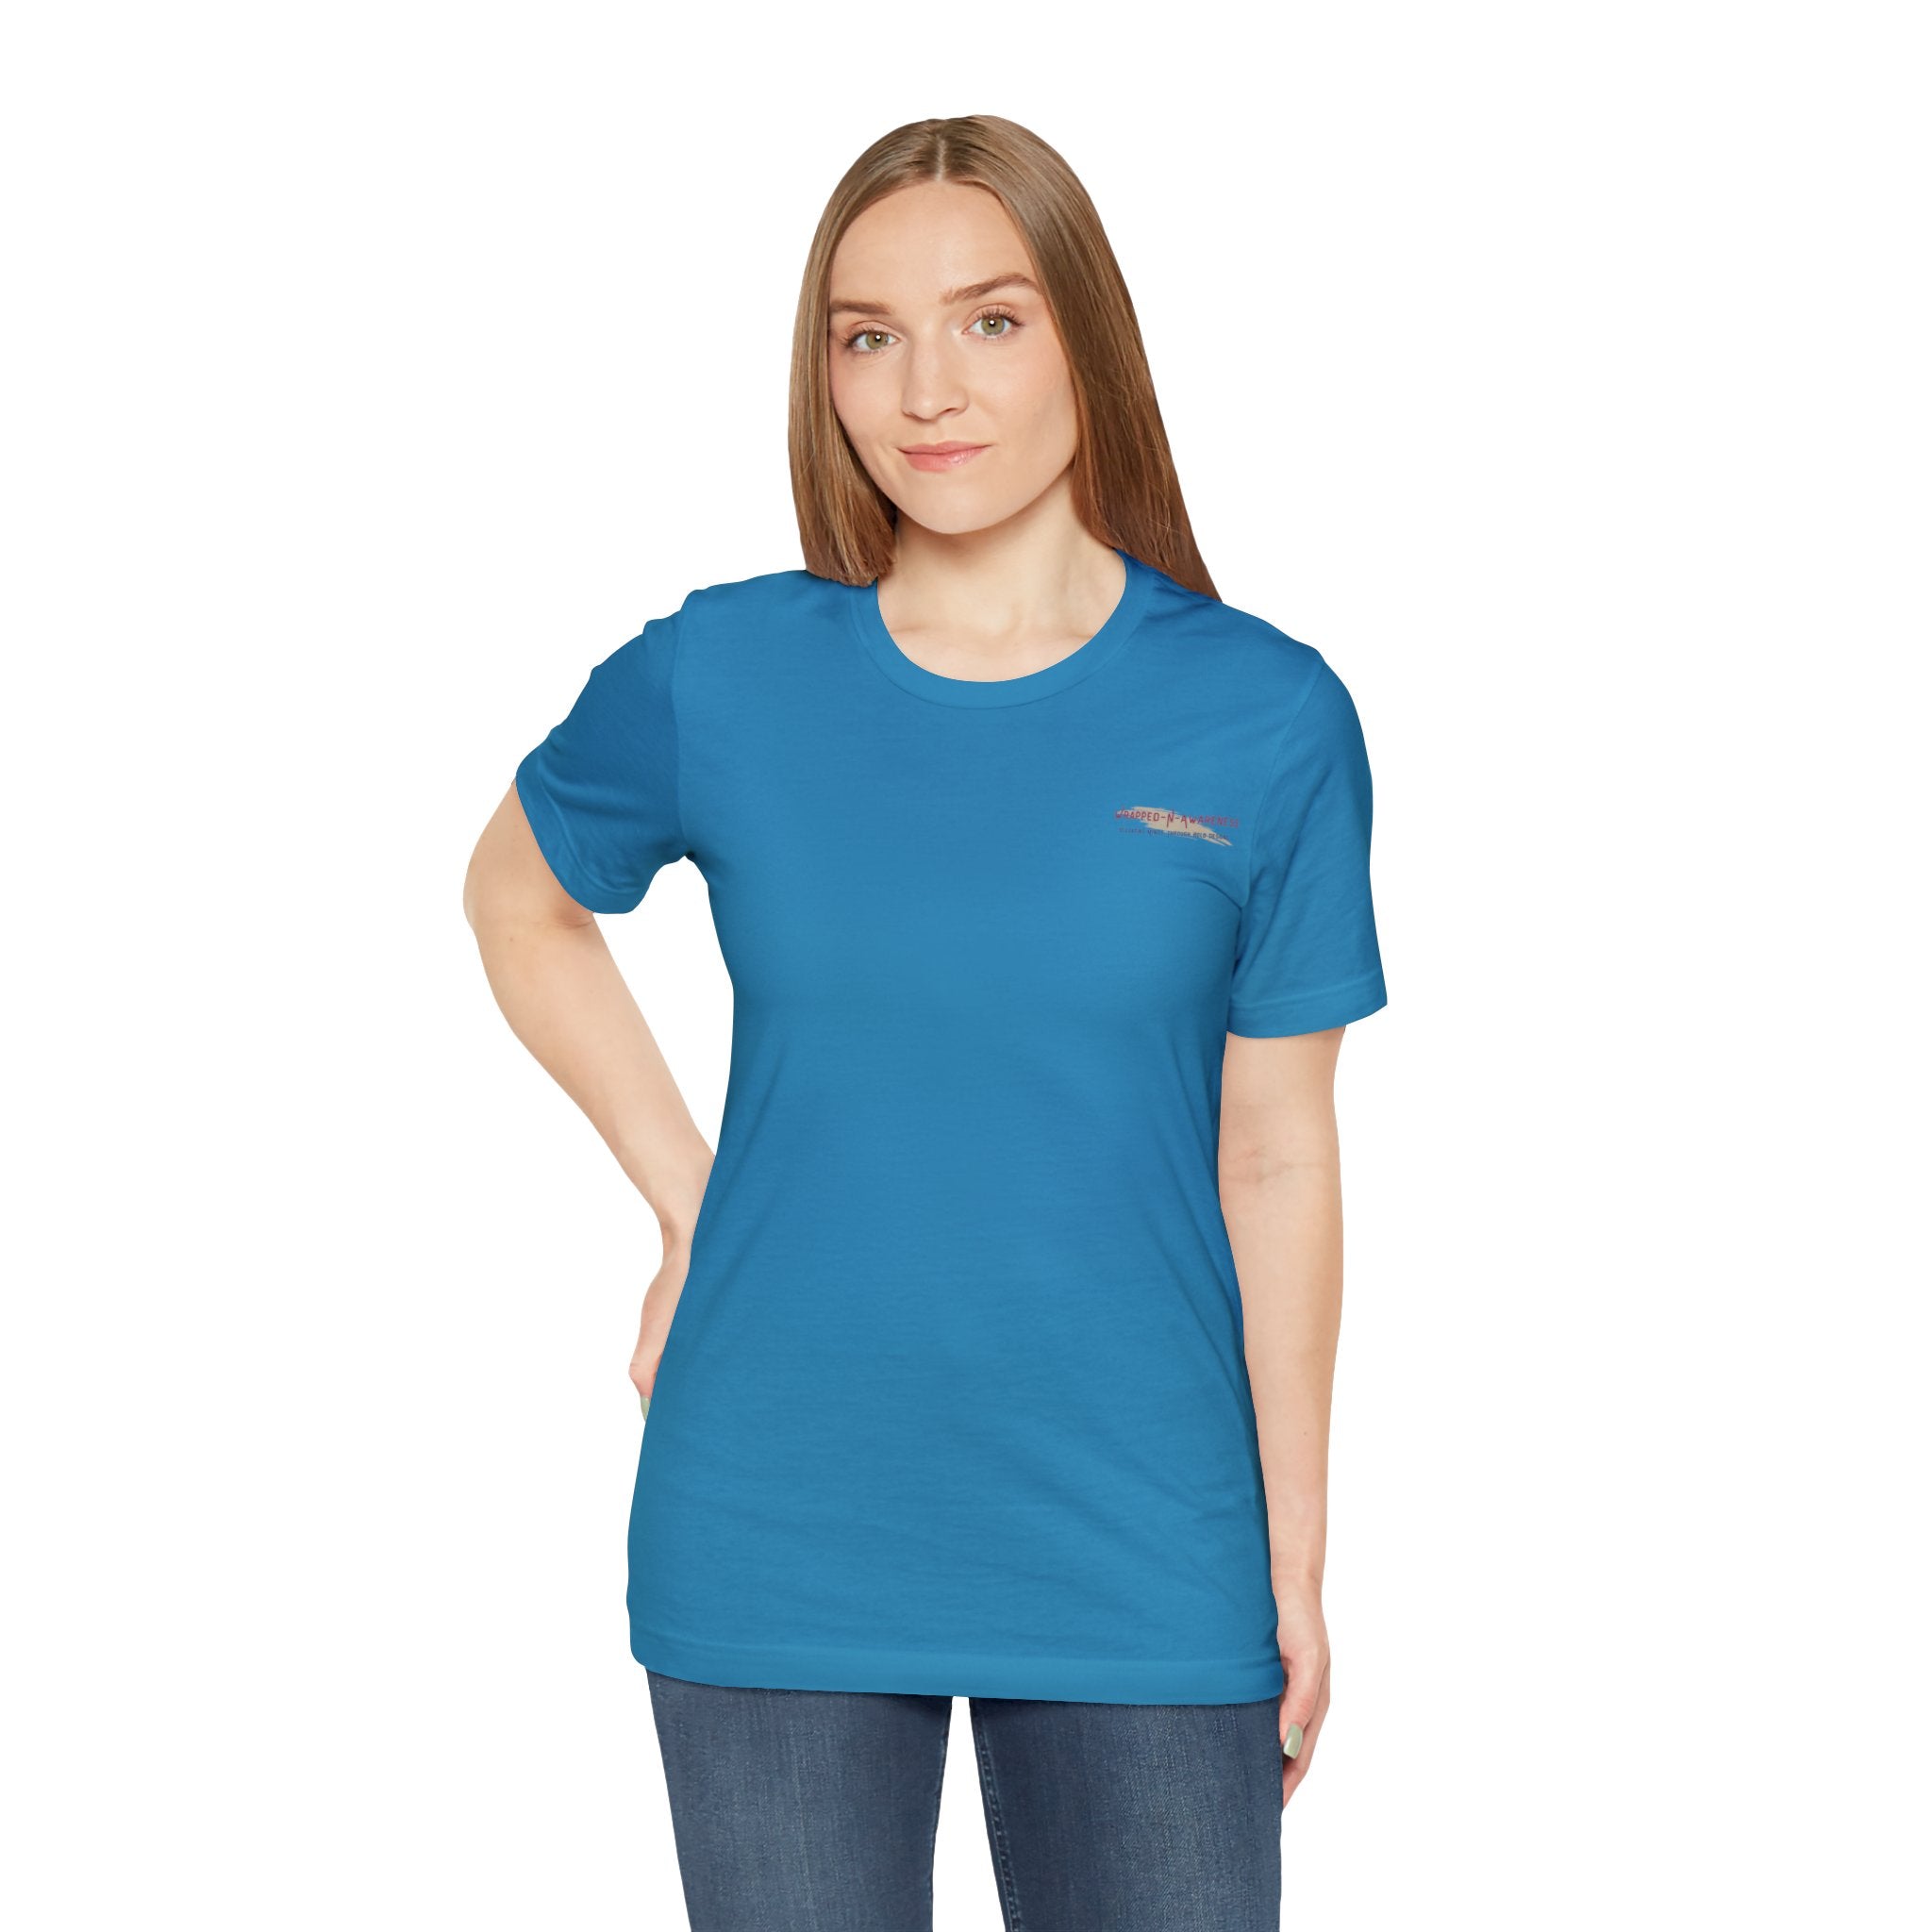 Inspire Growth Jersey Tee - Bella+Canvas 3001 Turquoise Airlume Cotton Bella+Canvas 3001 Crew Neckline Jersey Short Sleeve Lightweight Fabric Mental Health Support Retail Fit Tear-away Label Tee Unisex Tee T-Shirt 543117747284711398_2048 Printify